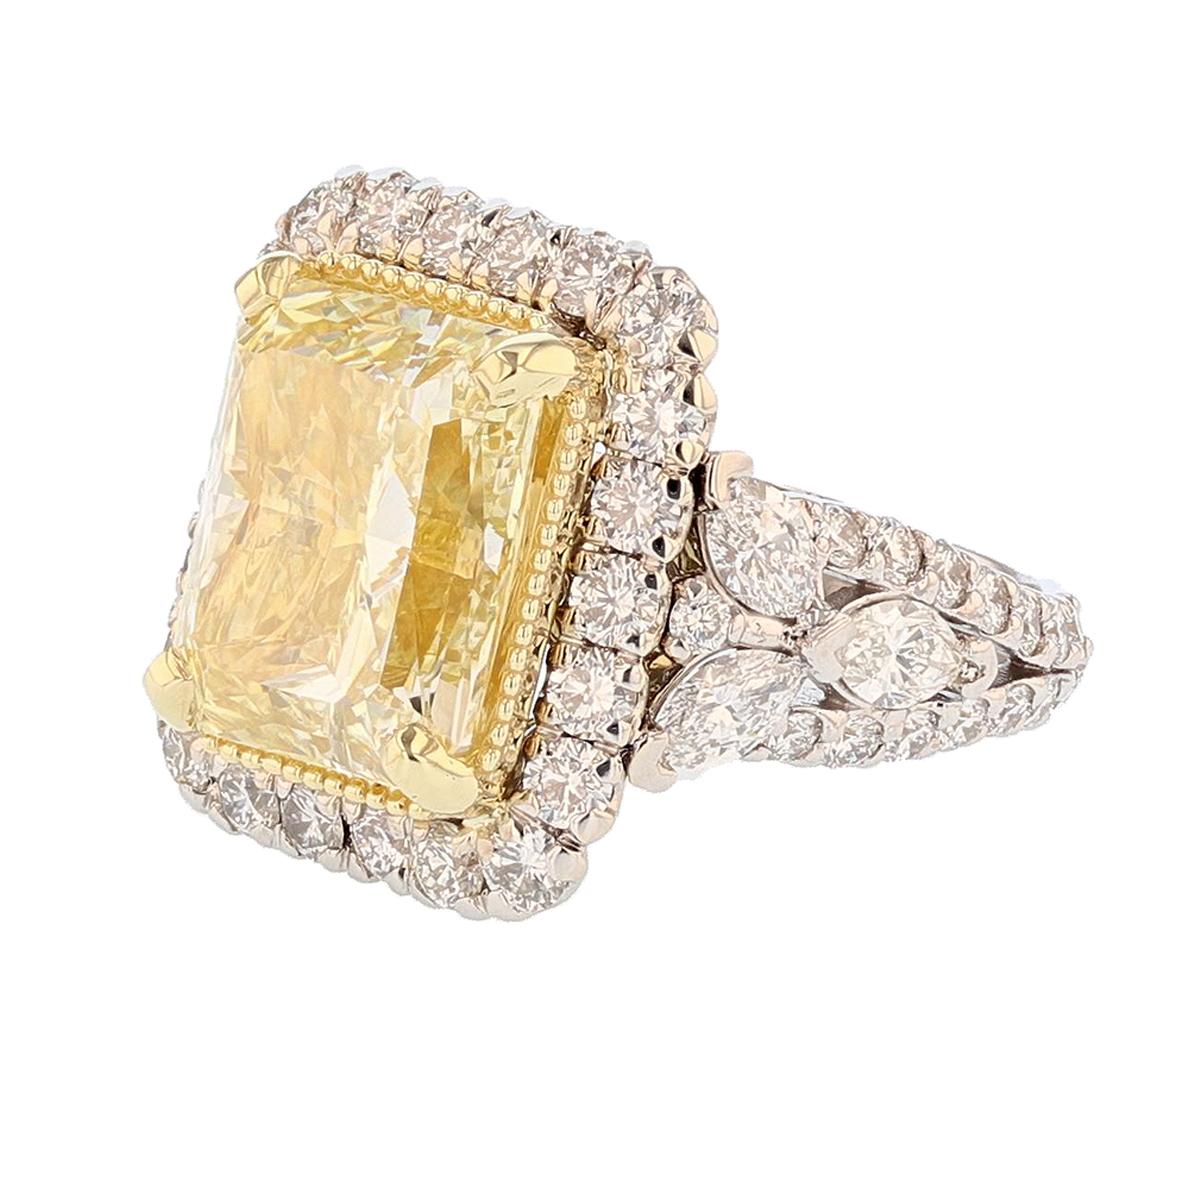 This ring is made in 18k white and yellow gold featuring a GIA certified 10.42ct Fancy Light Yellow radiant cut diamond clarity grade (VS1). The certificate number is GIA 2205182288. The ring also features 82 round cut diamonds prong set weighing